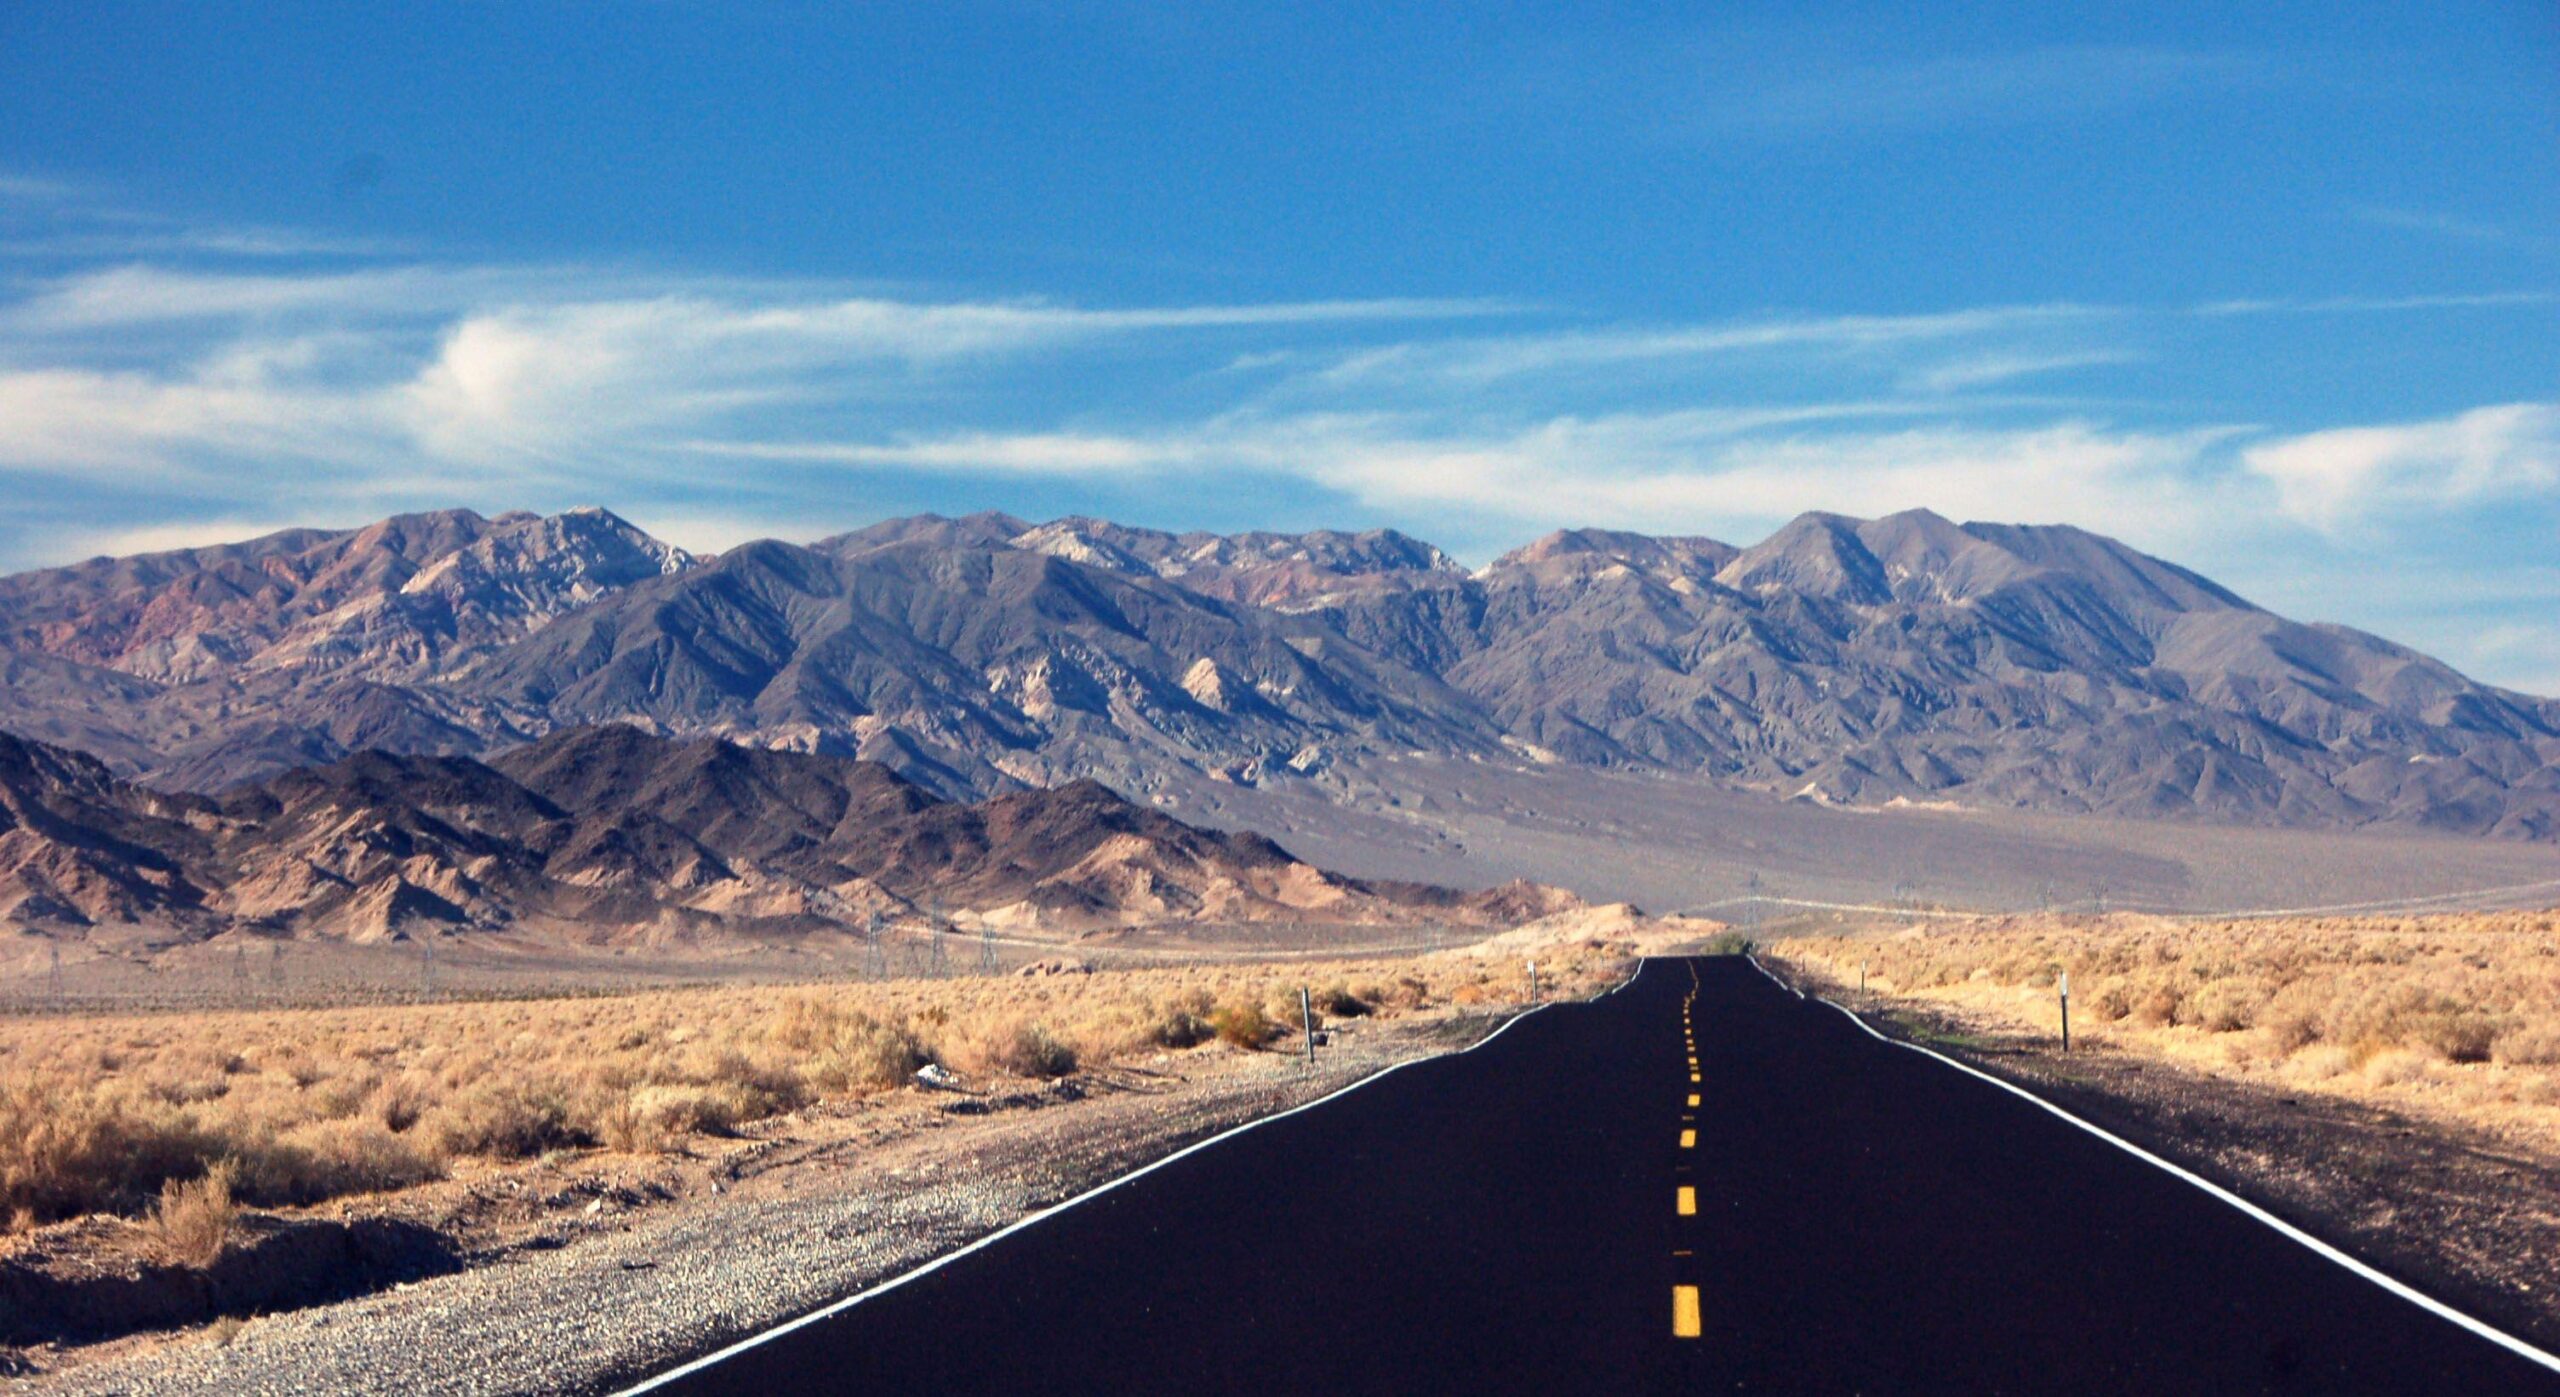 Resolution Awesome Death Valley Pics 2K Wallpapers for mobile and